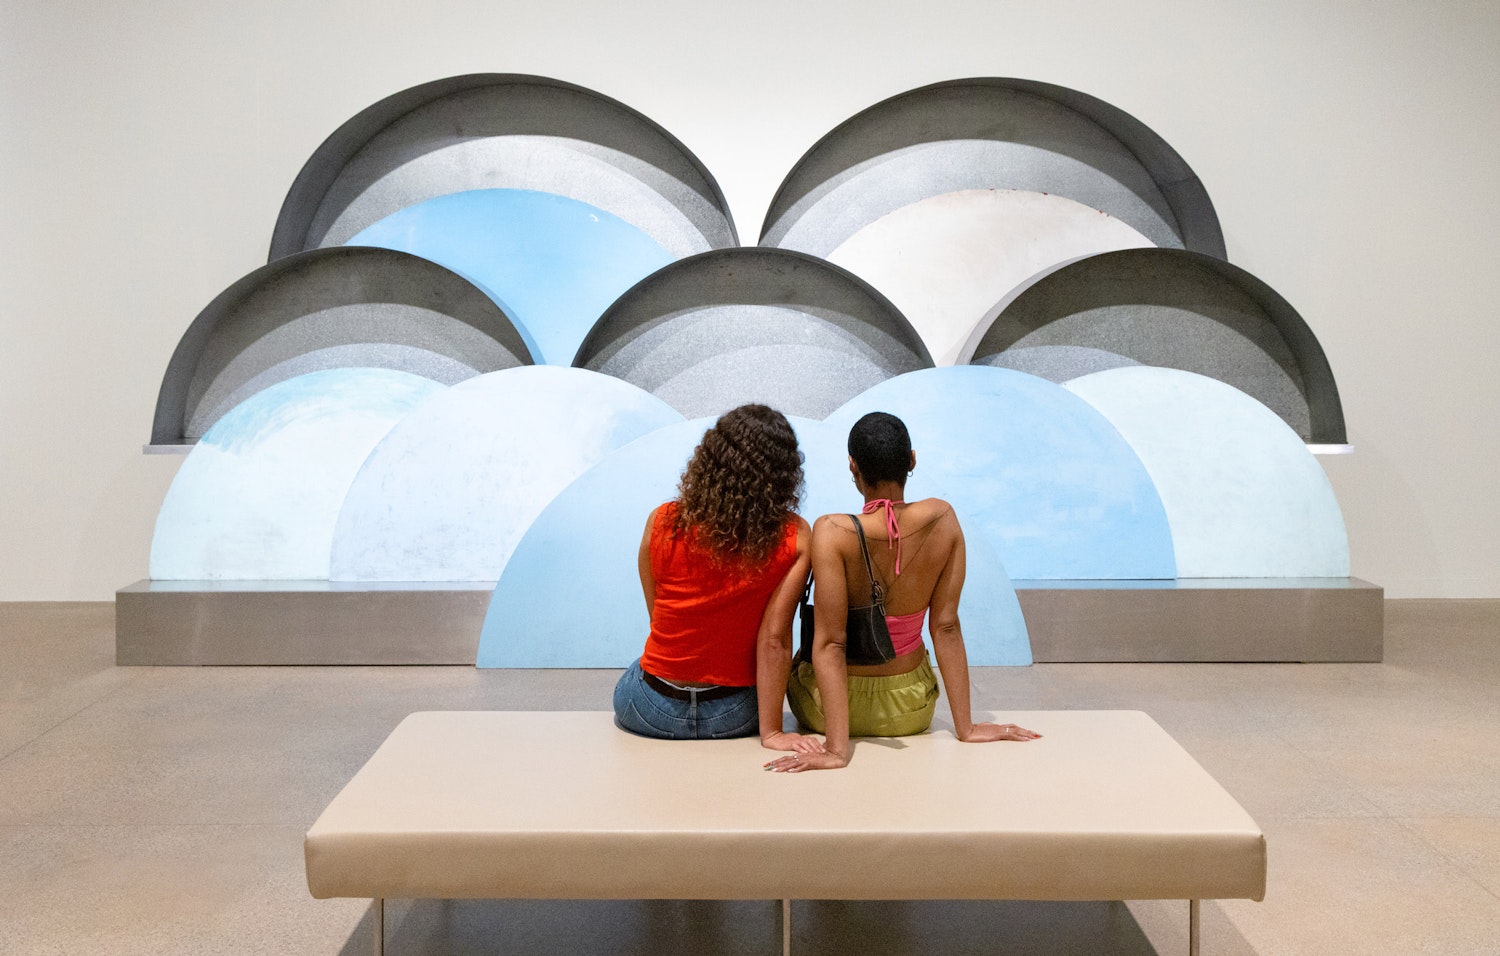 Two people sit looking at a large sculpture of overlapping cloud-like semi-circles